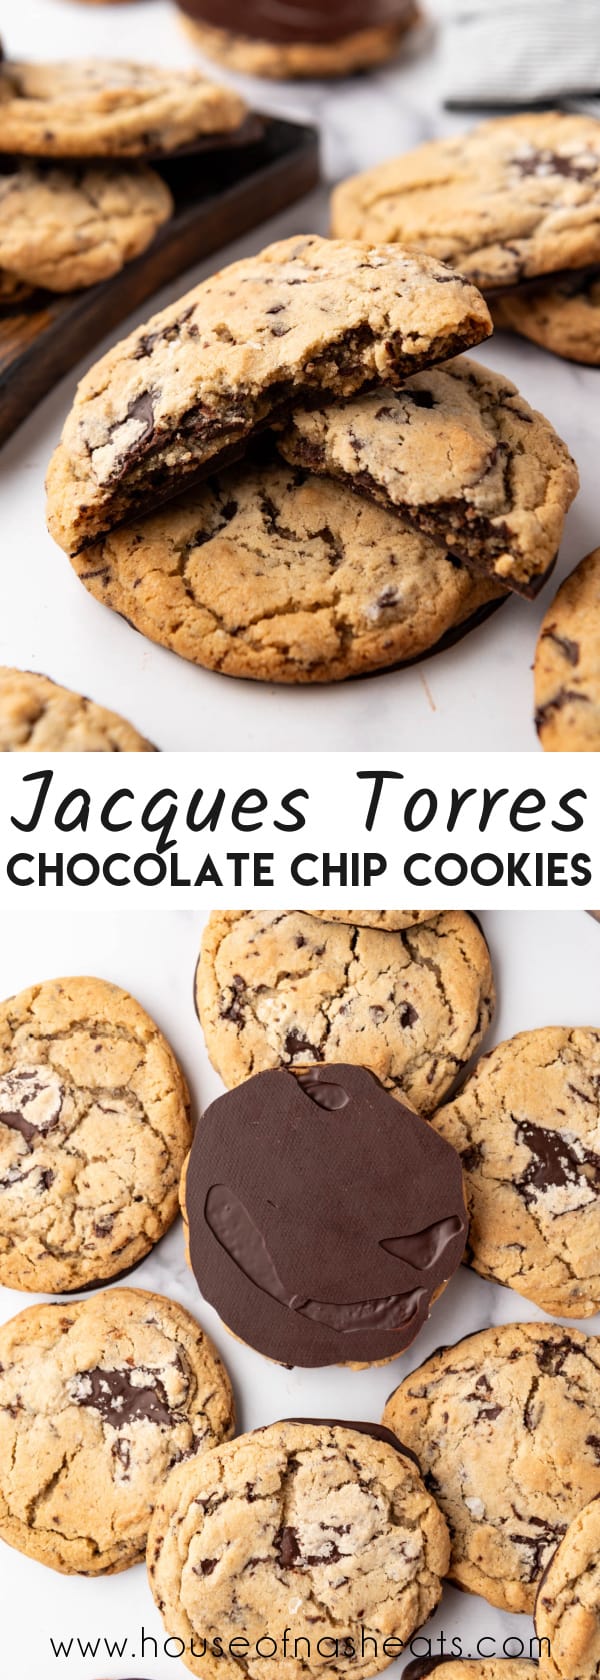 A collage of images of Jacques Torres chocolate chip cookies with text overlay.